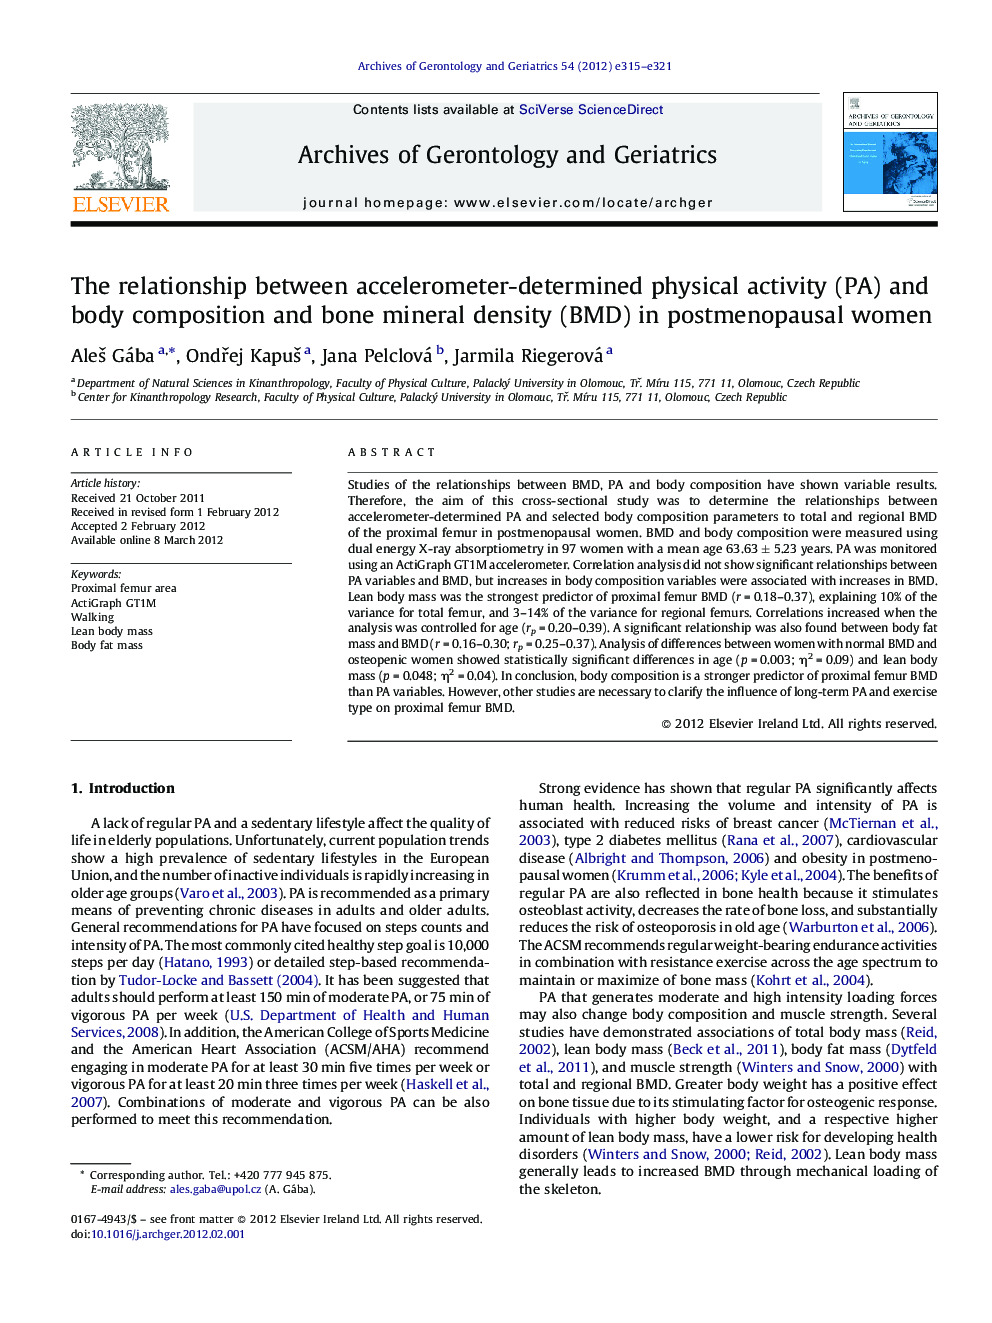 The relationship between accelerometer-determined physical activity (PA) and body composition and bone mineral density (BMD) in postmenopausal women